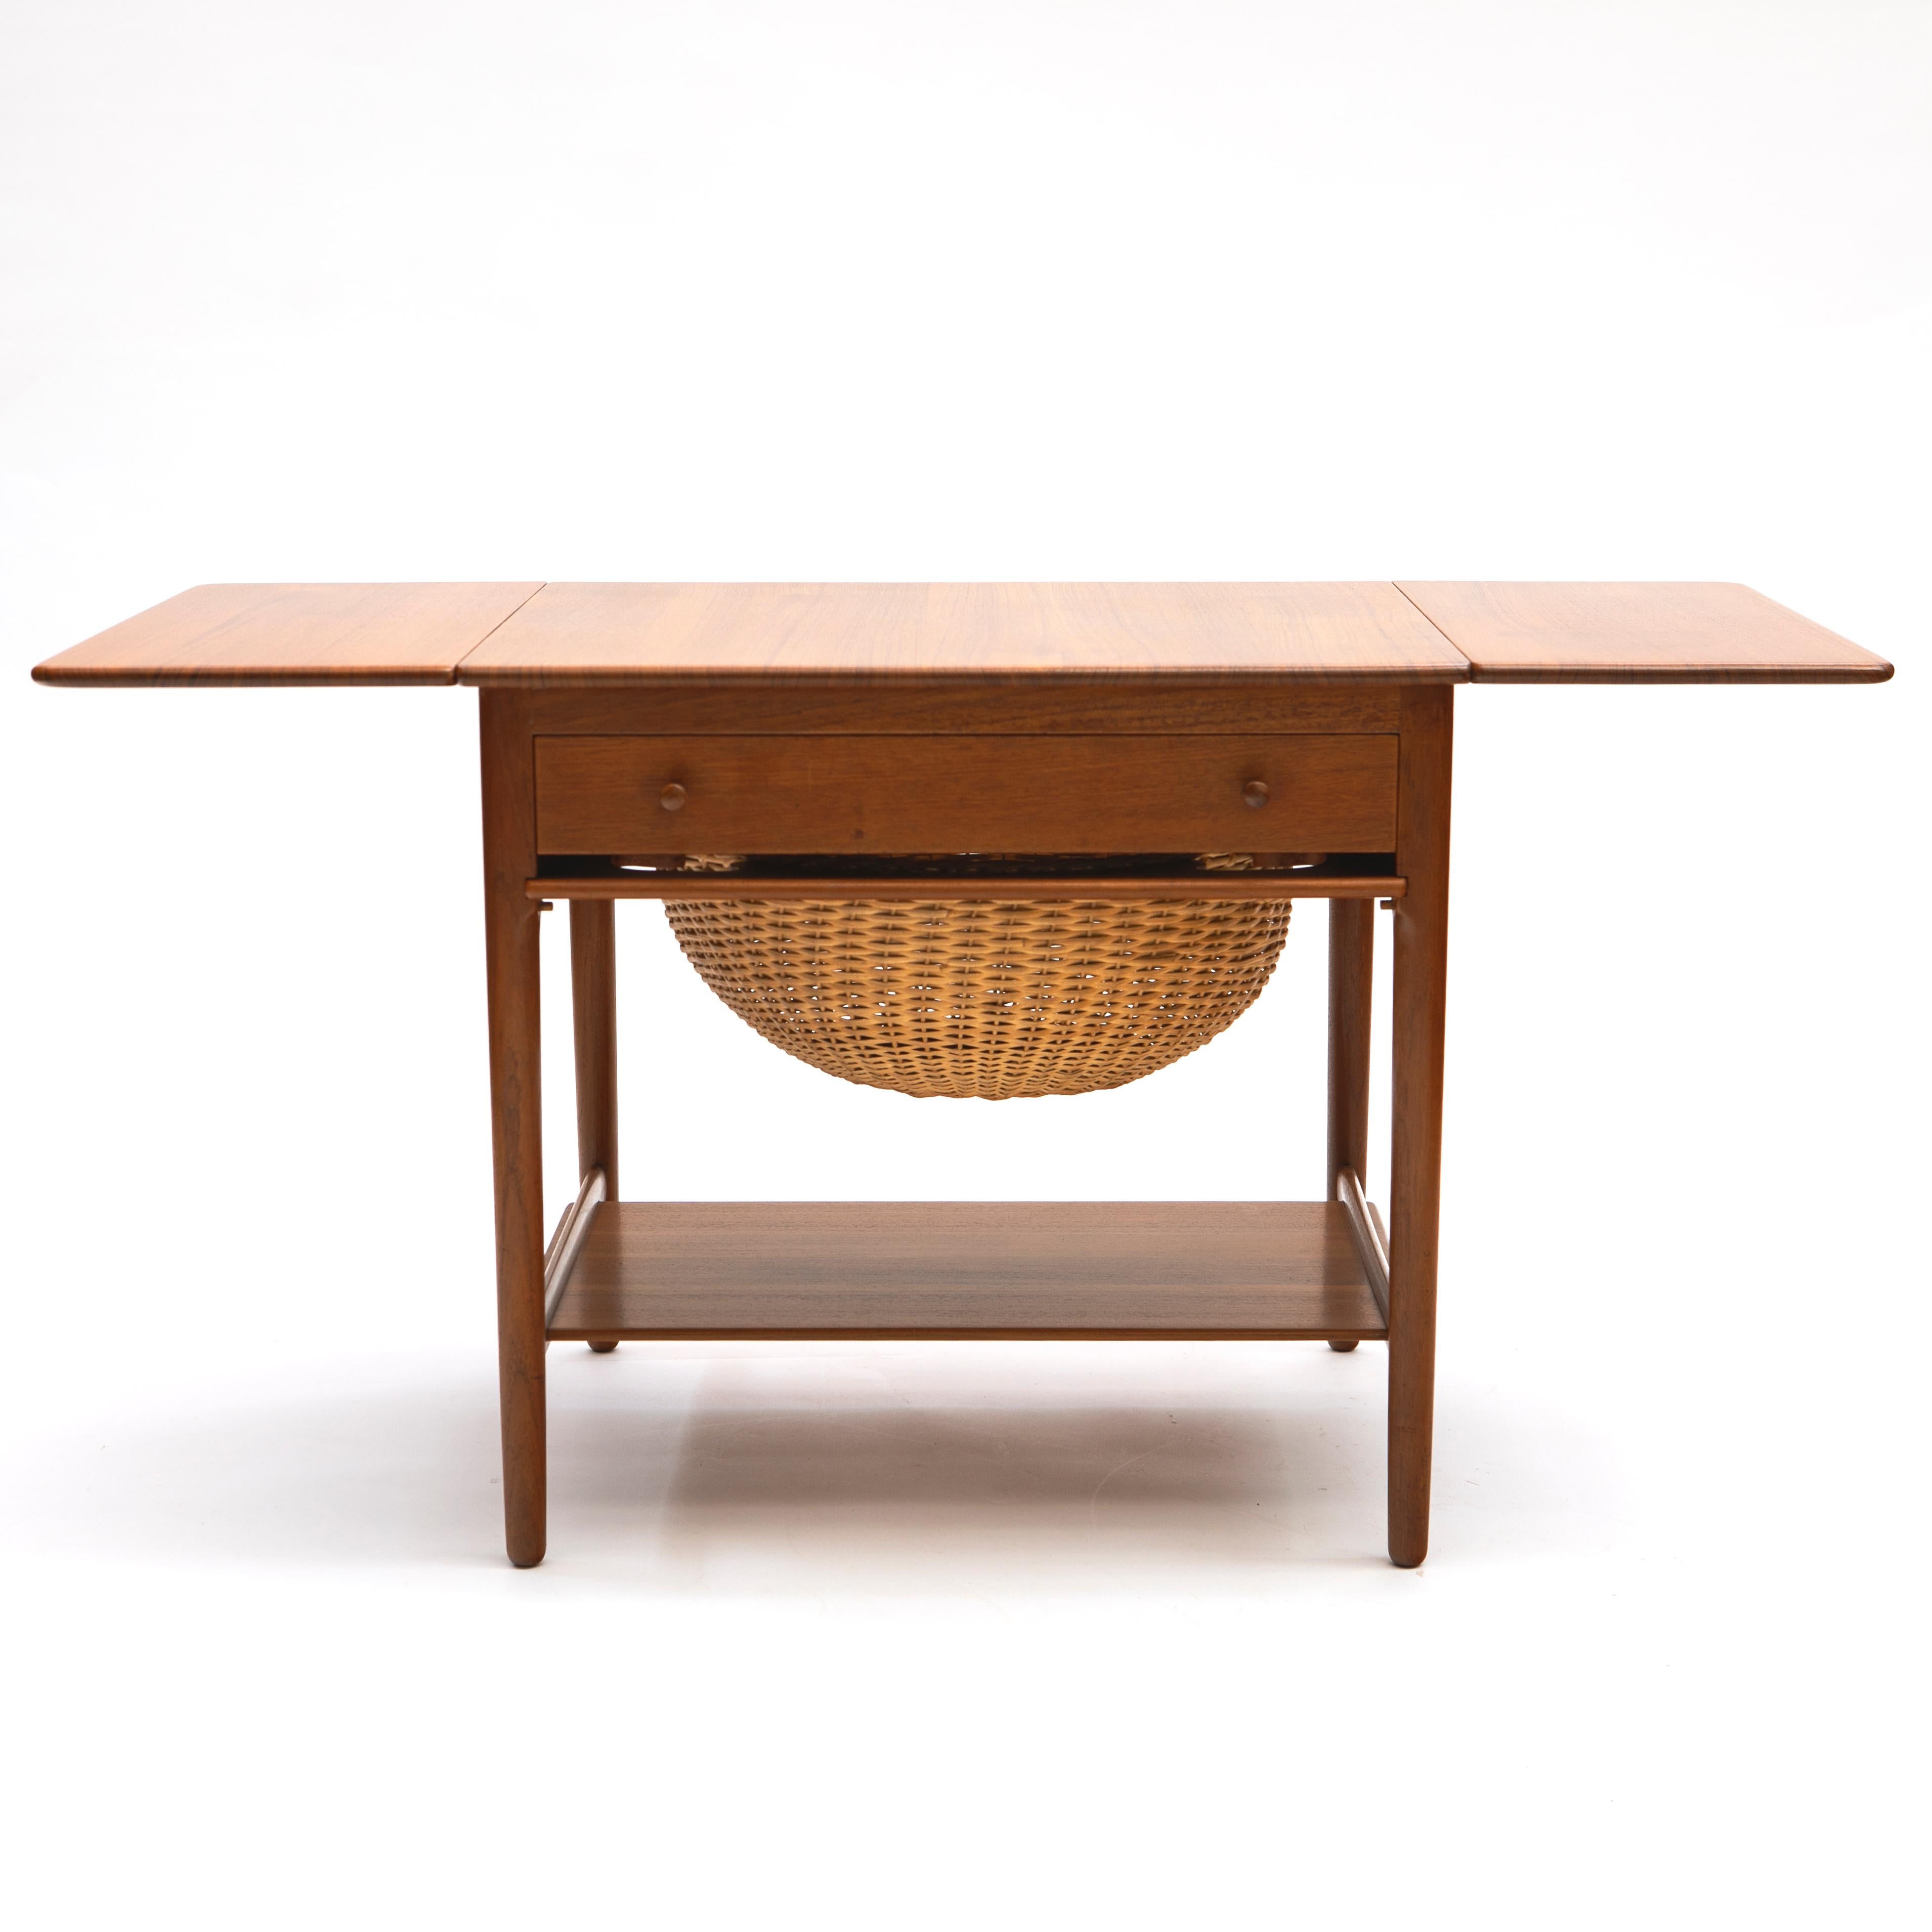 Sewing table, model AT-33 in solid teak.
Features drop leaves, a wicker basket for knitting’s, and a drawer with spindles and divisions for thread and other supplies. 
Designed by Hans J. Wegner manufactured in Denmark by cabinet maker Andreas Tuck,